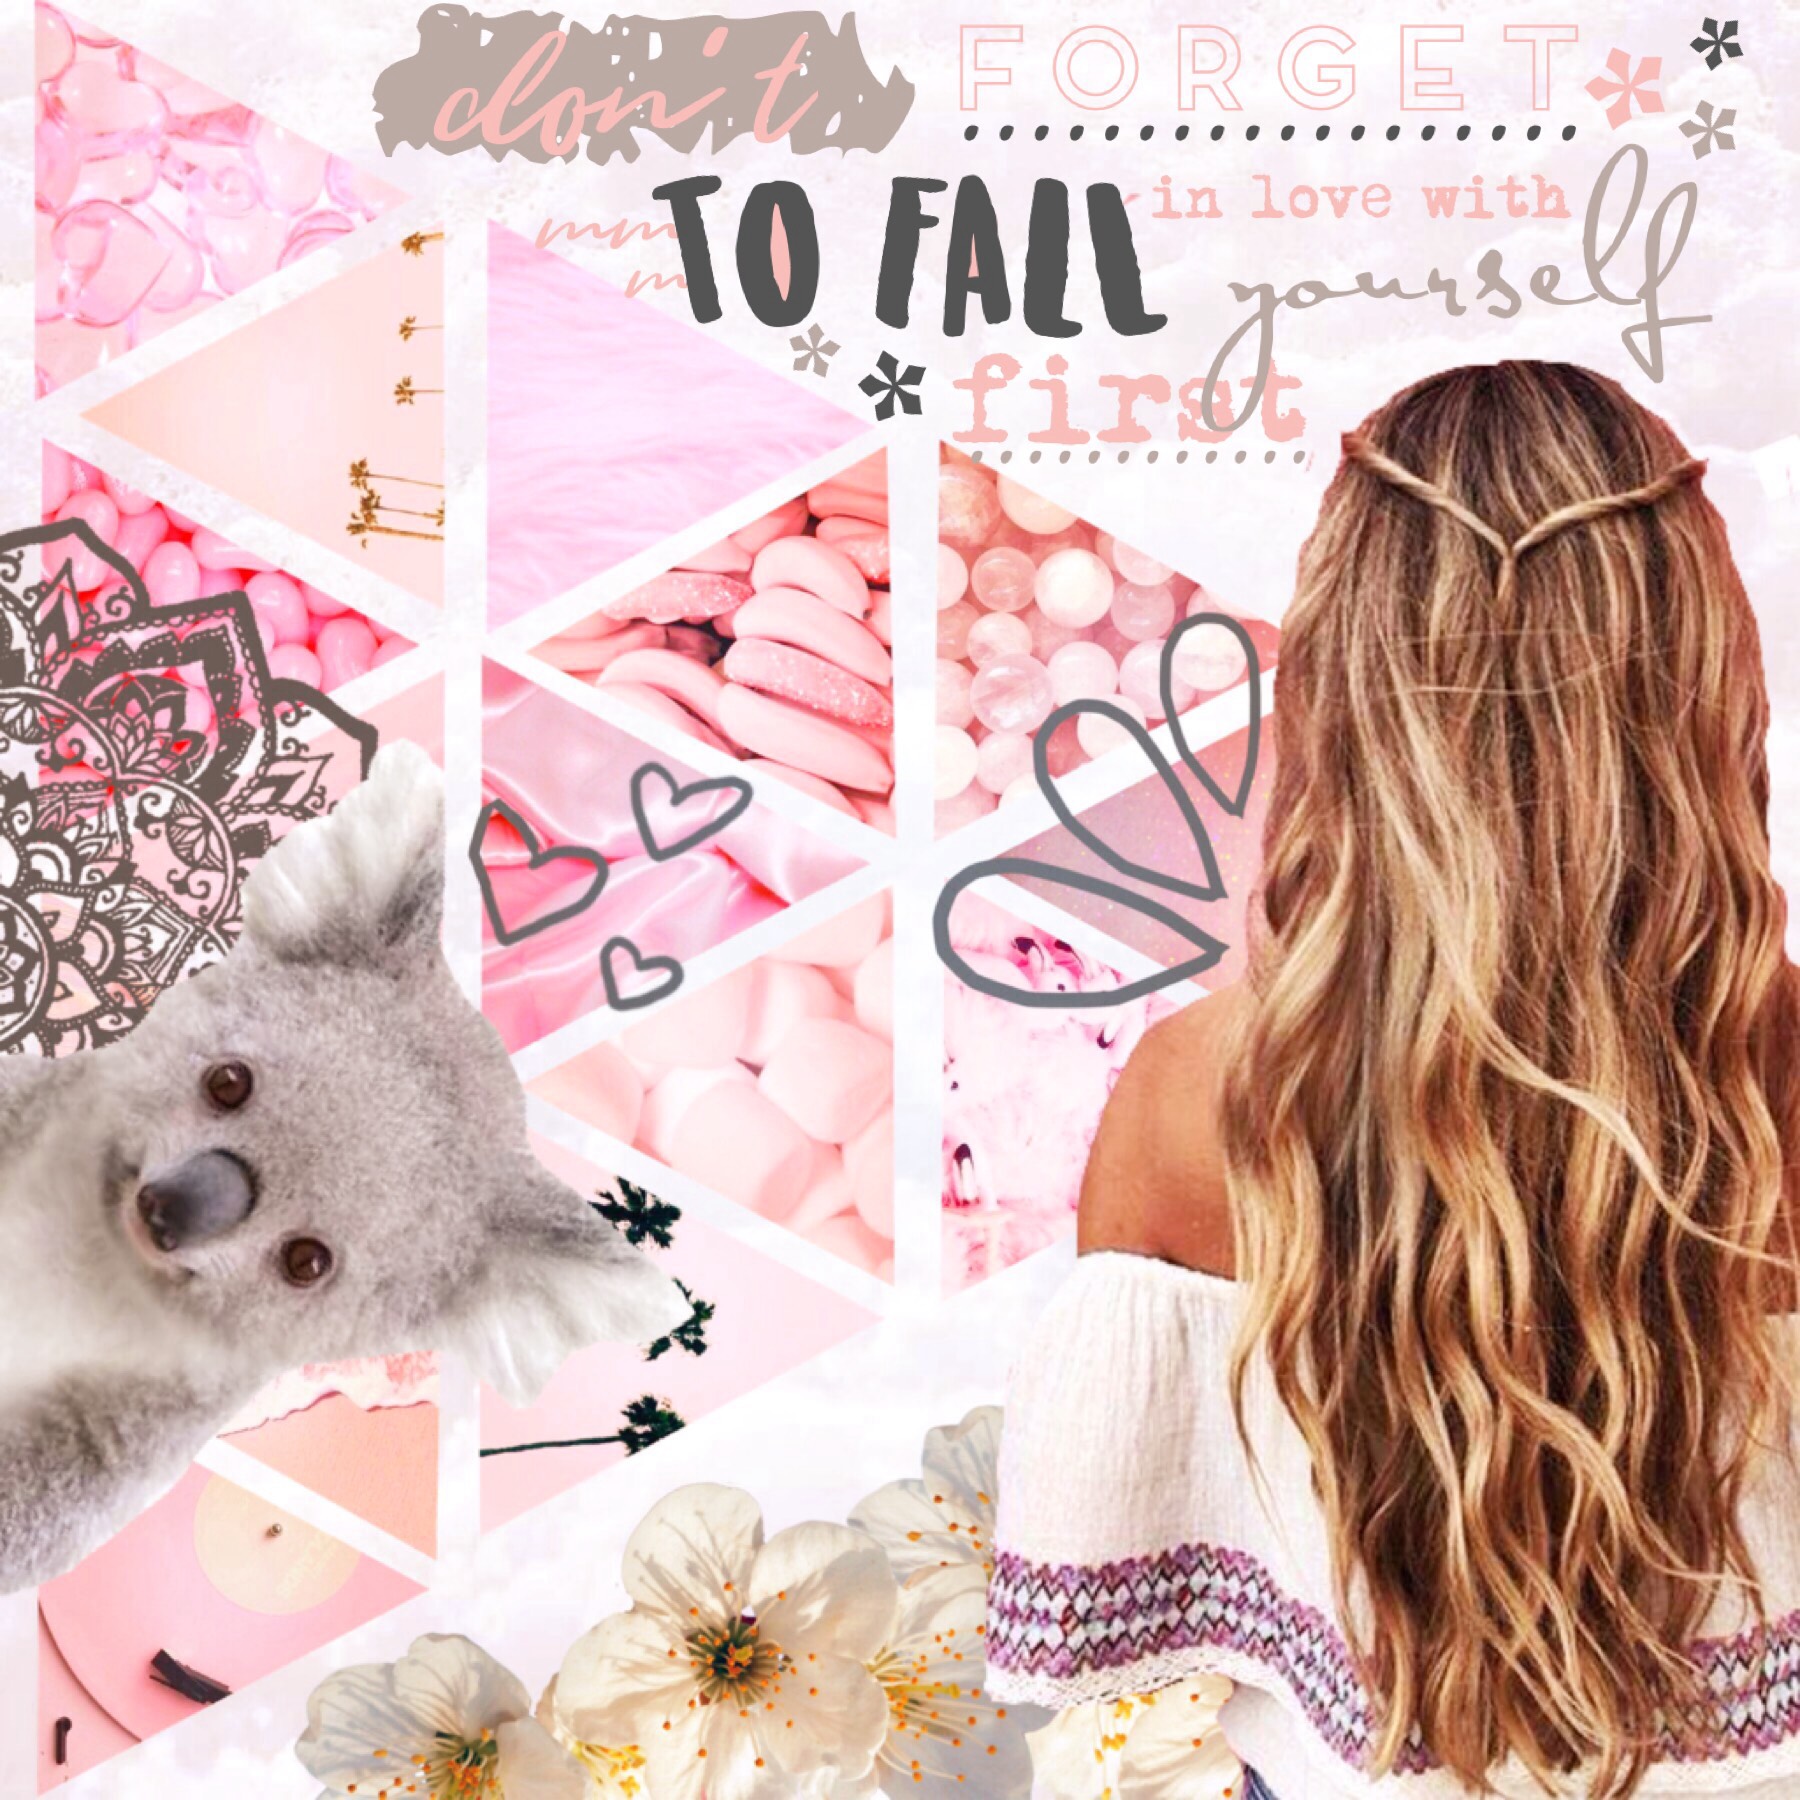 Me trying something new! 😱 What a suprise! 😂Is it better than my old style? Tap! 💕
QOTD: 🐨or🐼? <the actual animals not the emoji
AOTD: 🐼 its my fav animal! 💕